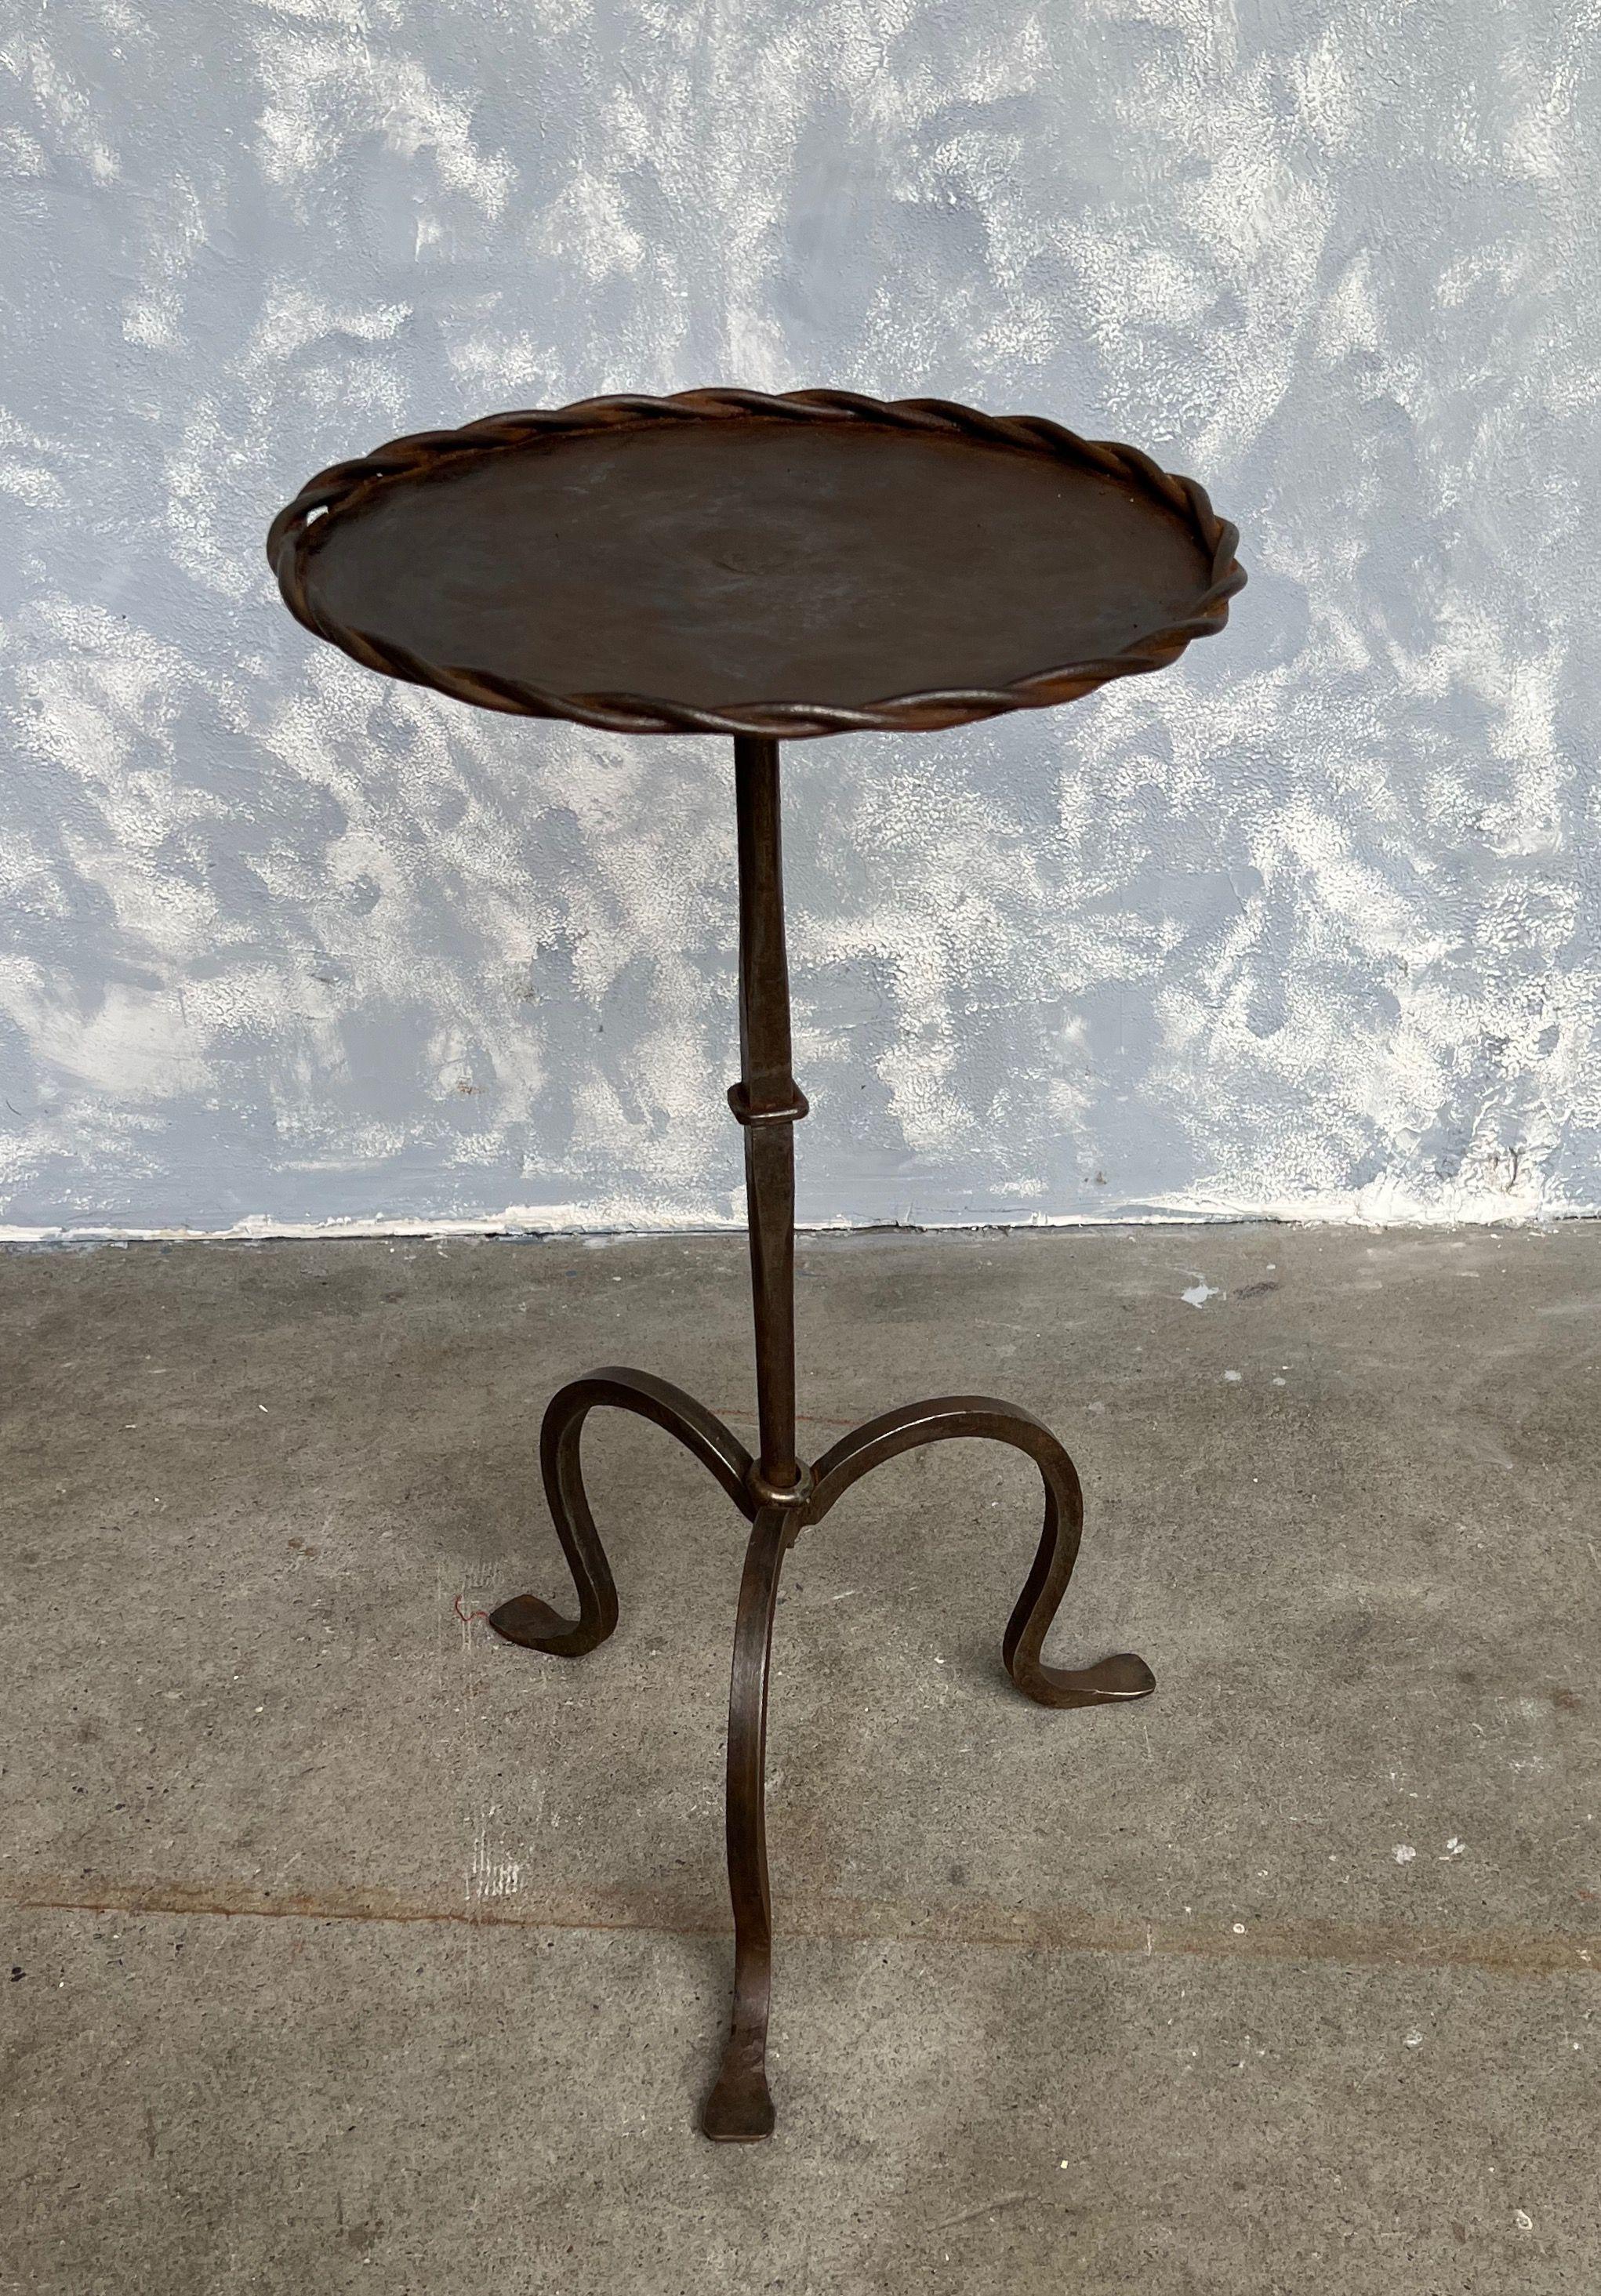 Small iron and metal end table with a tripod base, a central ring detail on the stem, and a braided surround at the top. Perfect for a drink, it can easily be moved around as needed. Beautiful bronzed patina. 

Spanish, 1950s. Very good vintage